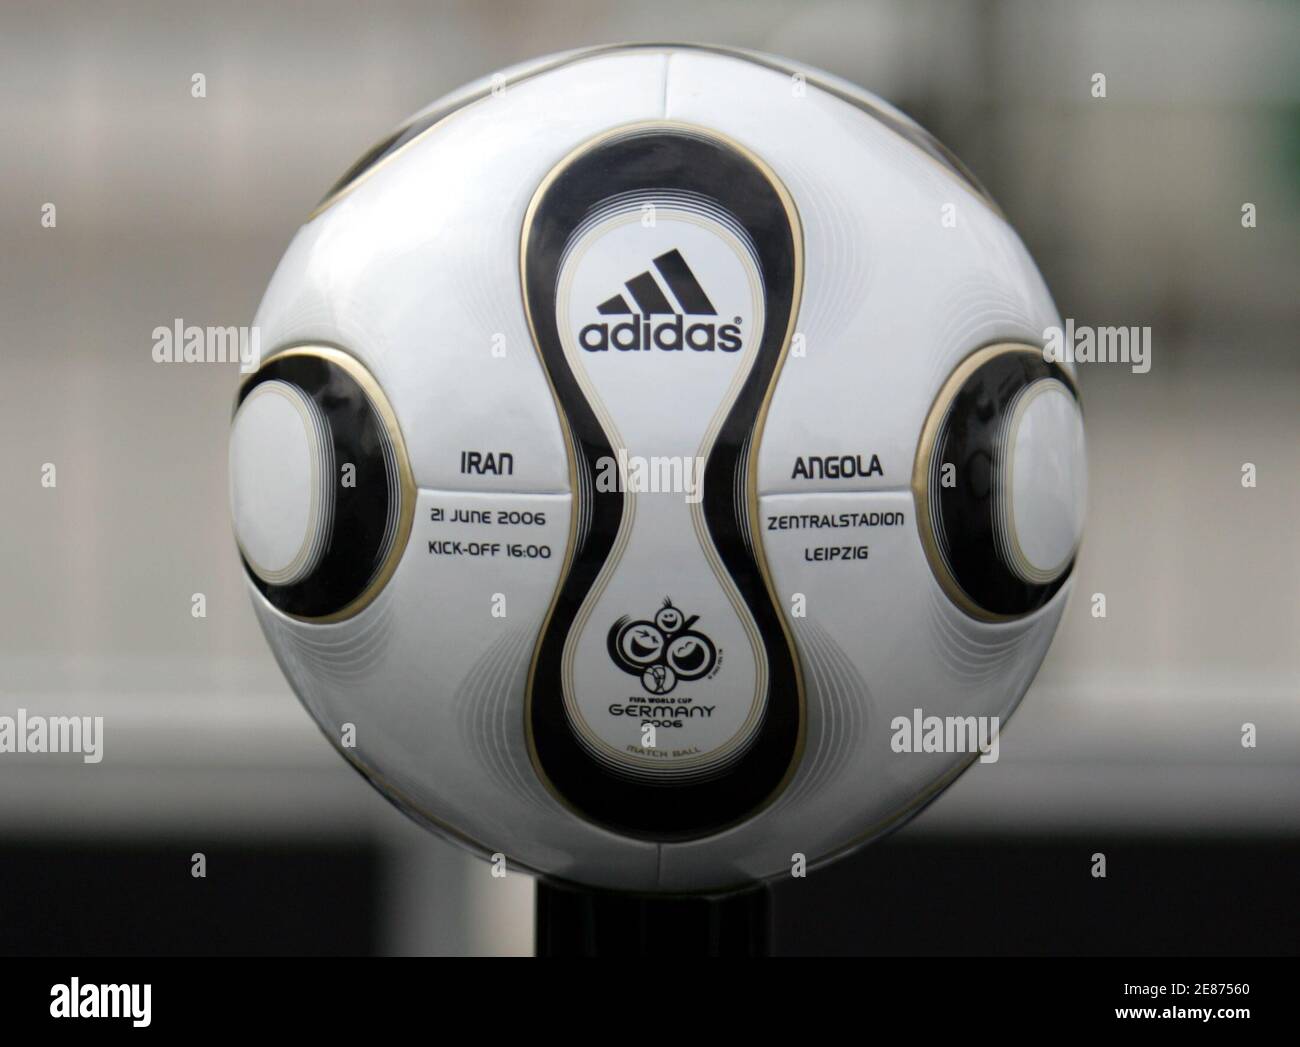 The soccer ball for the FIFA 2006 Soccer World Cup match between Iran and  Angola in Leipzig is presented to the media in Berlin April 18, 2006.  President of Germany's World Cup